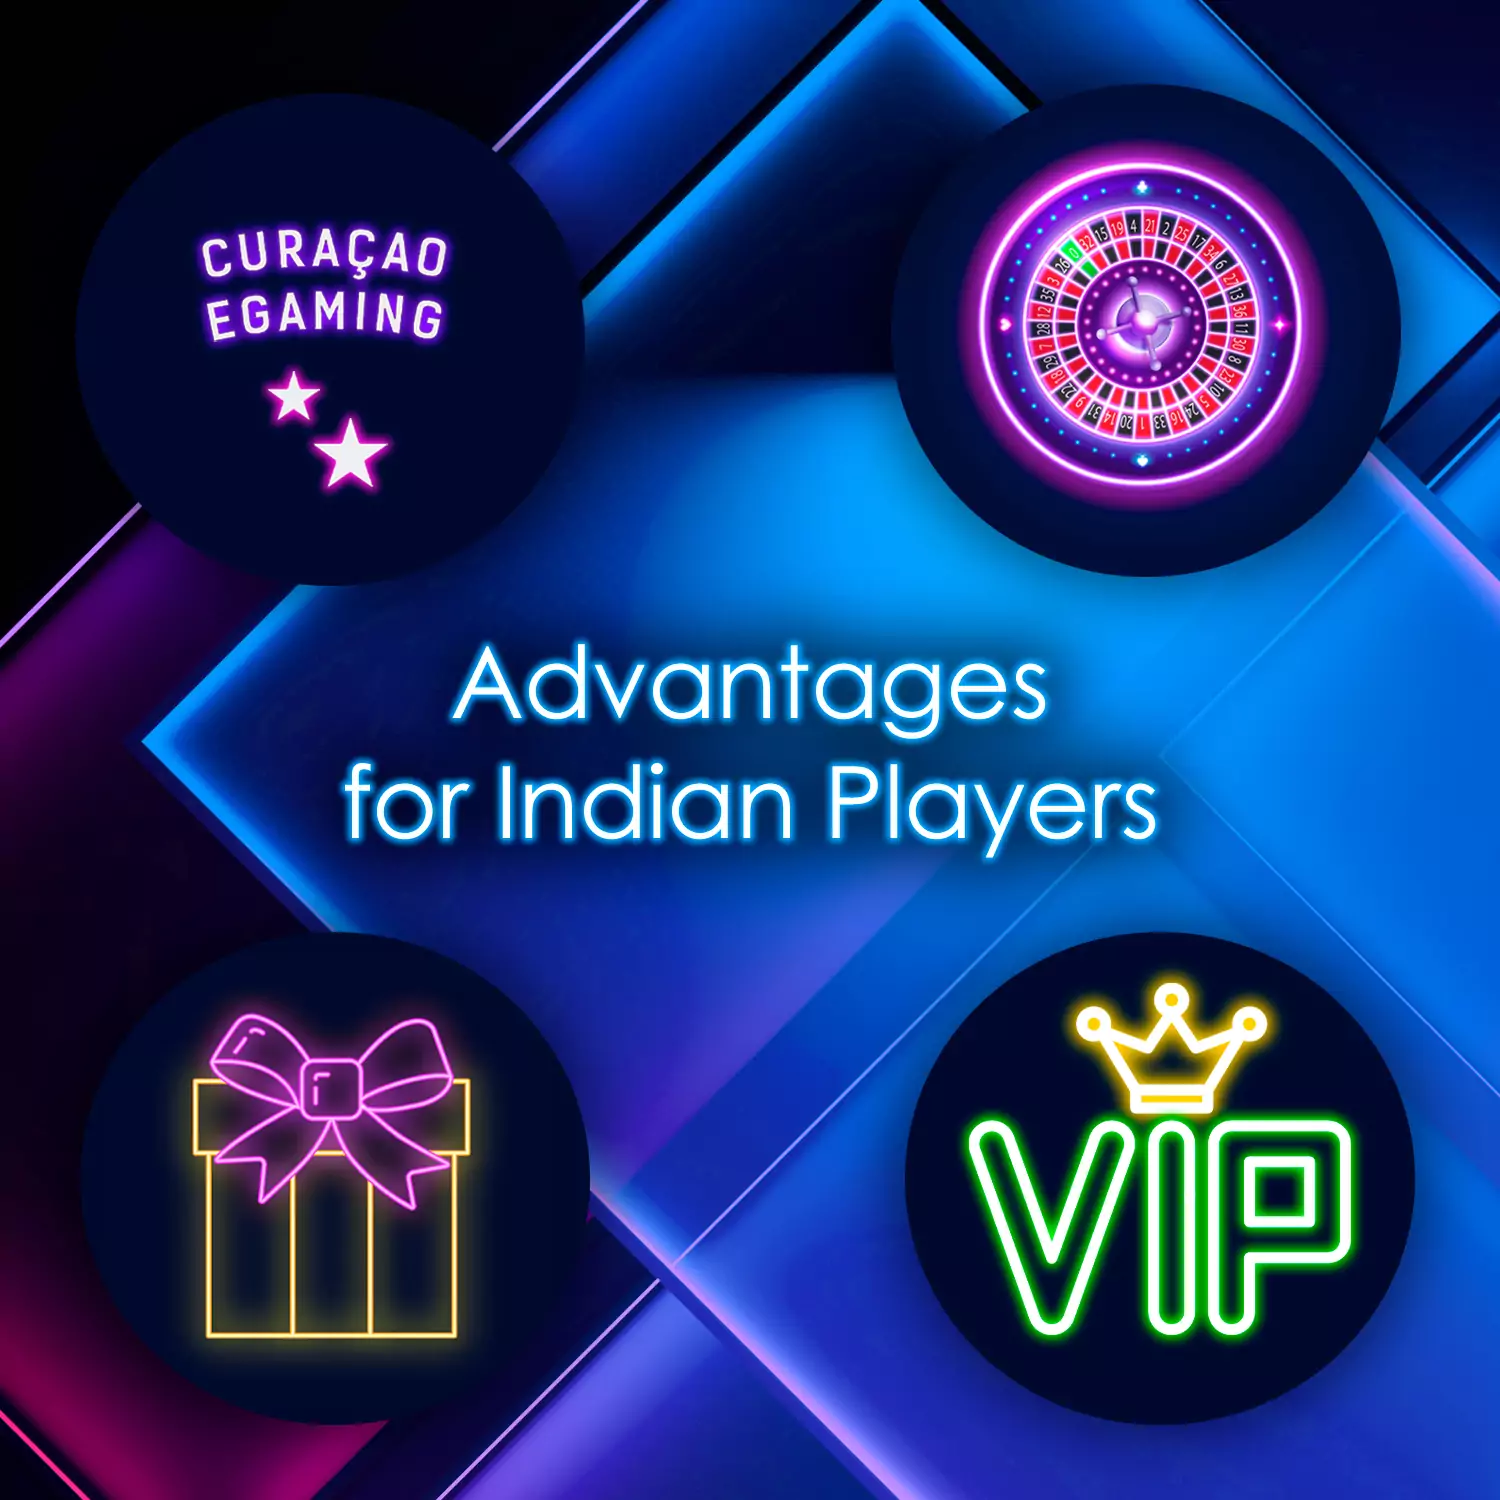 The Mostbet Casino site has a list of advantages that may be useful for Indian players.